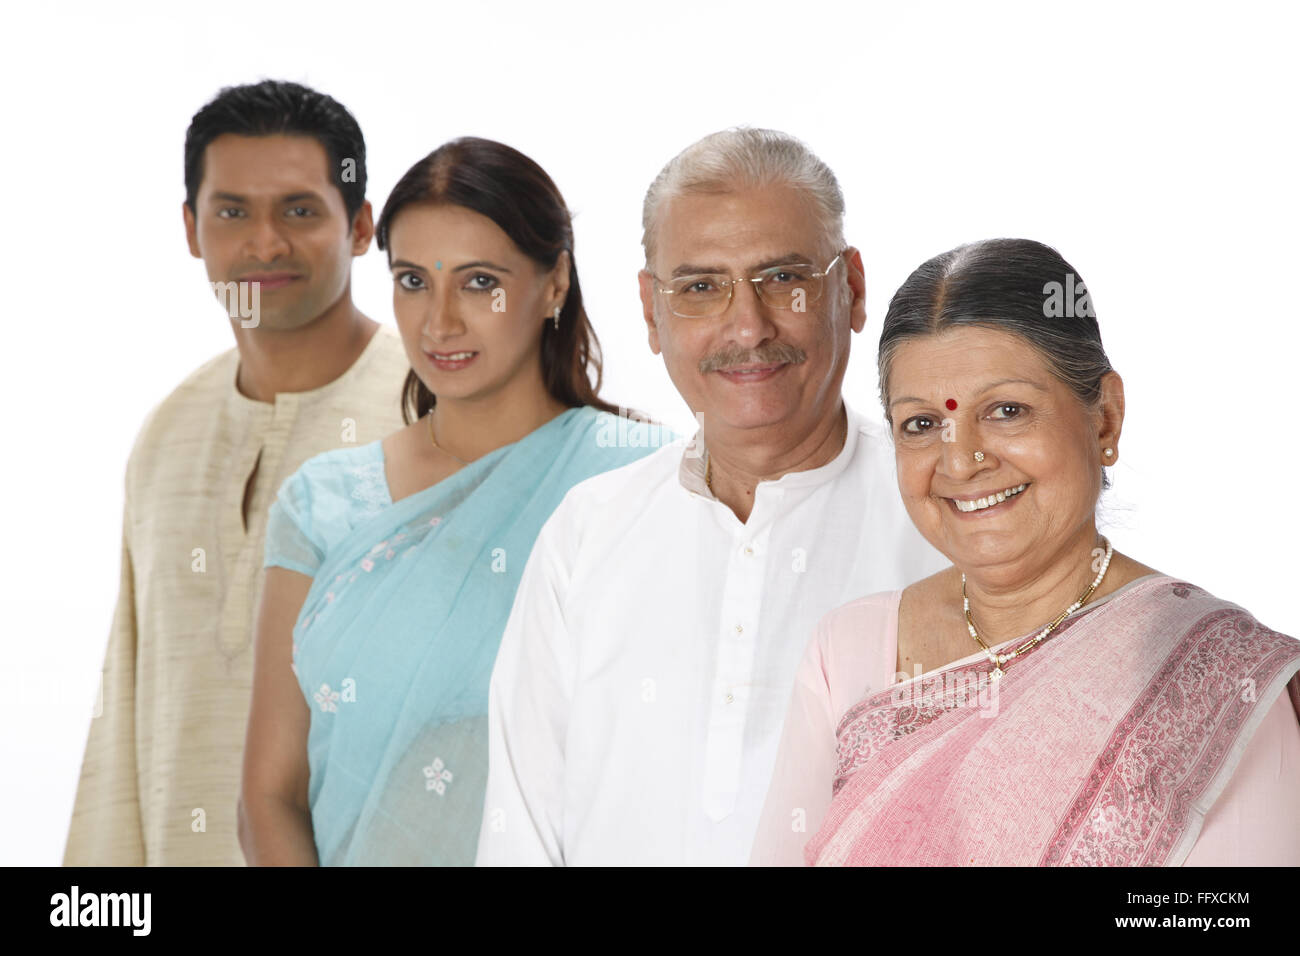 Young man woman with old parent standing in row MR#703P,703Q,703R,703S Stock Photo